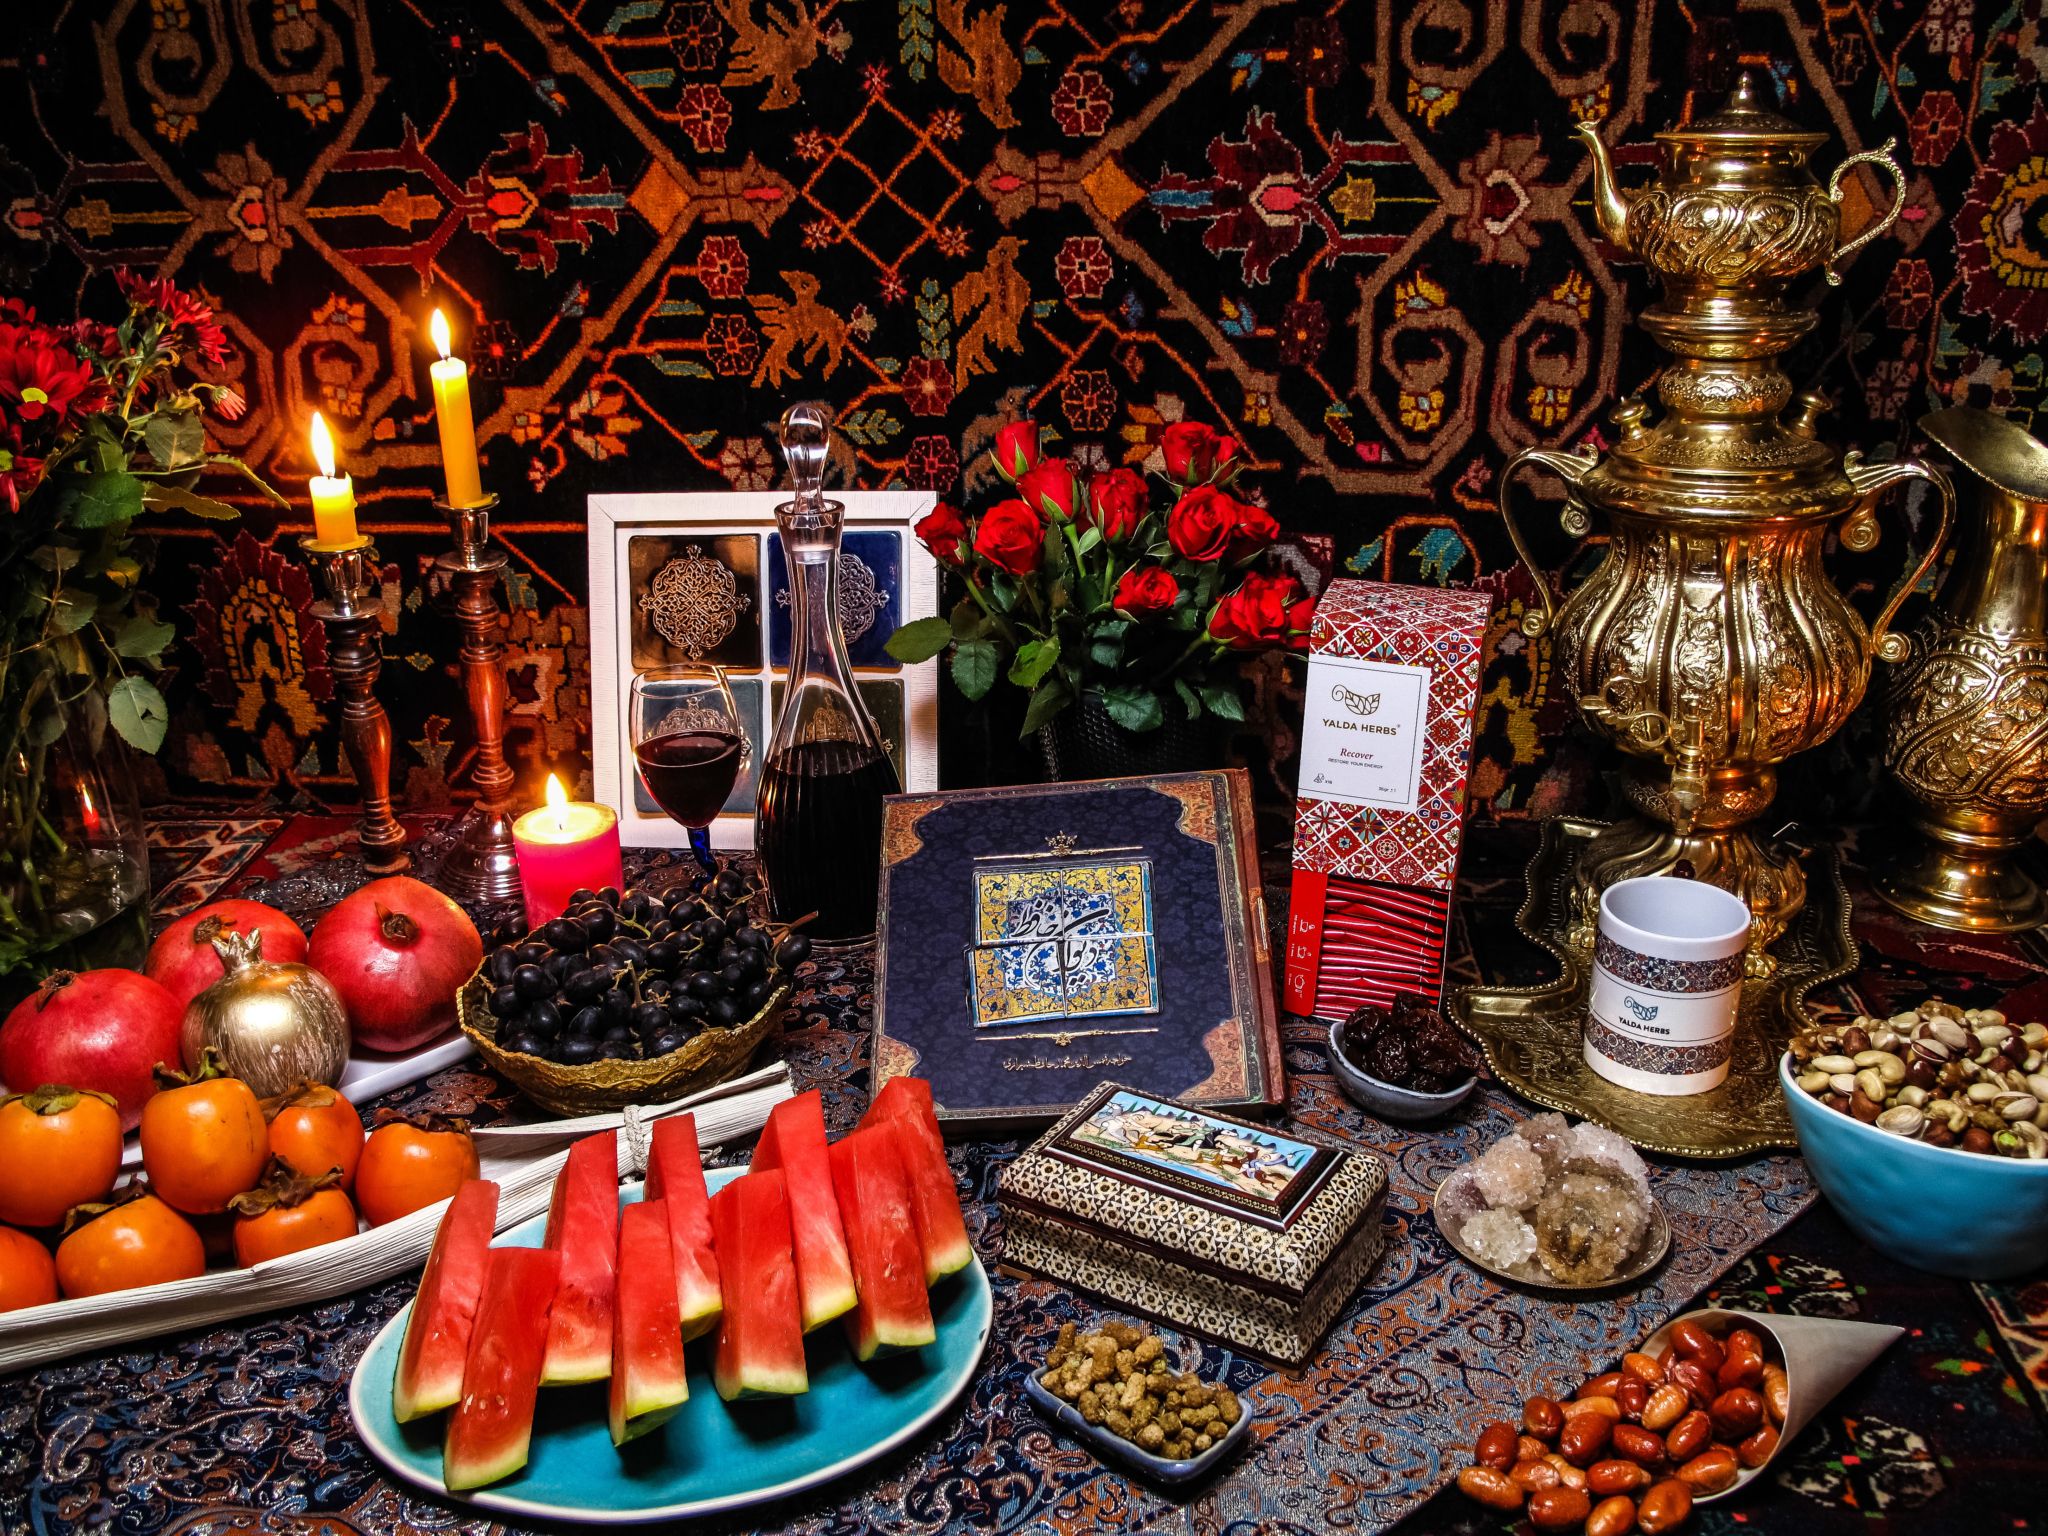 How to Celebrate the longest night of the year like an Iranian?